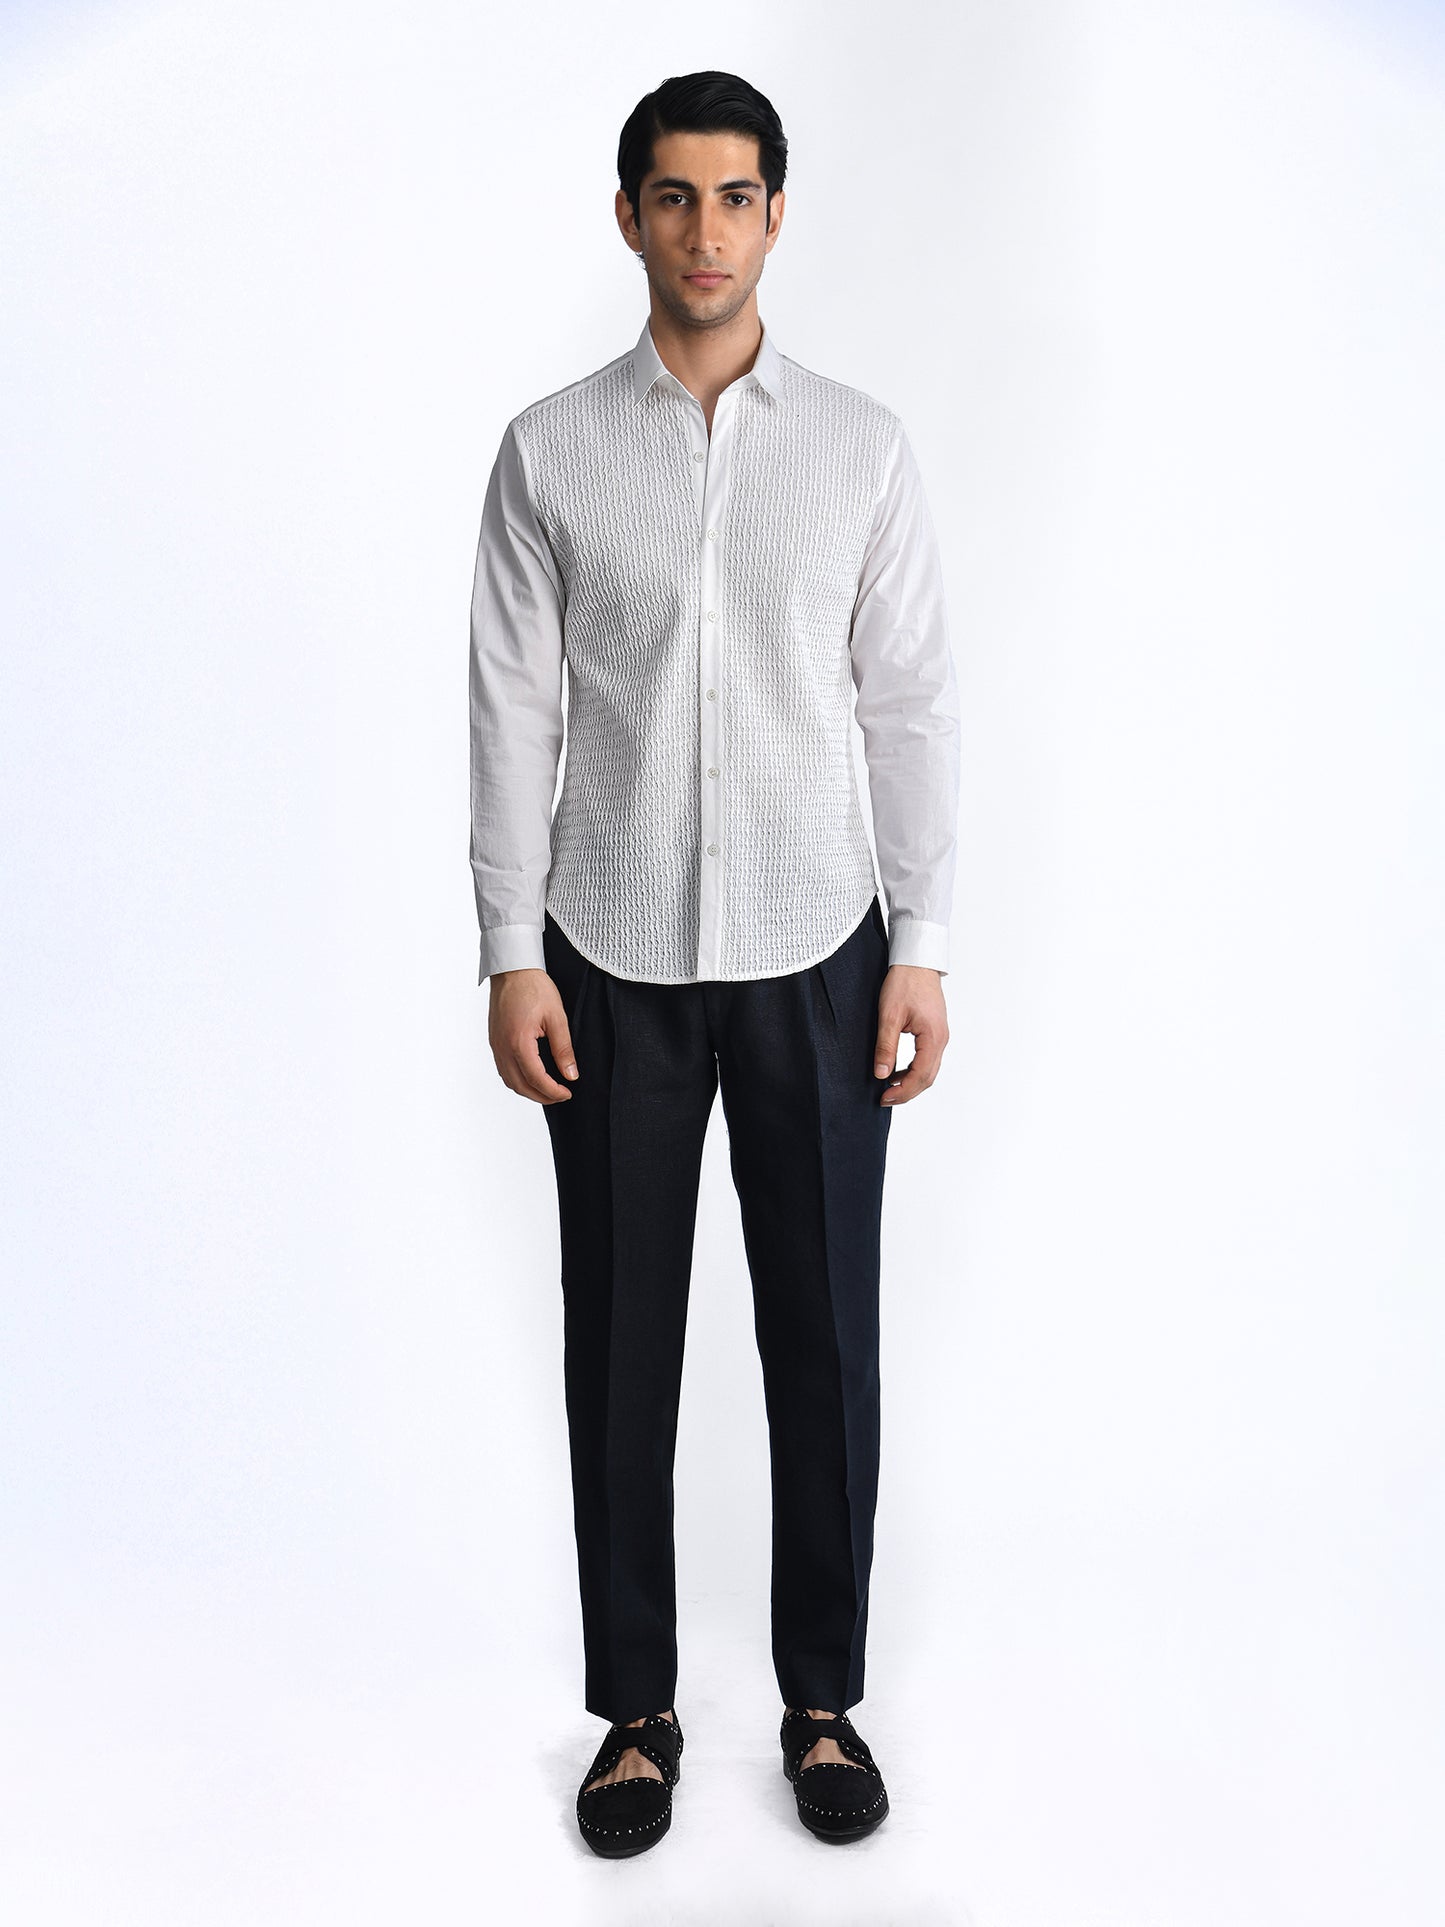 White Collated Shirt